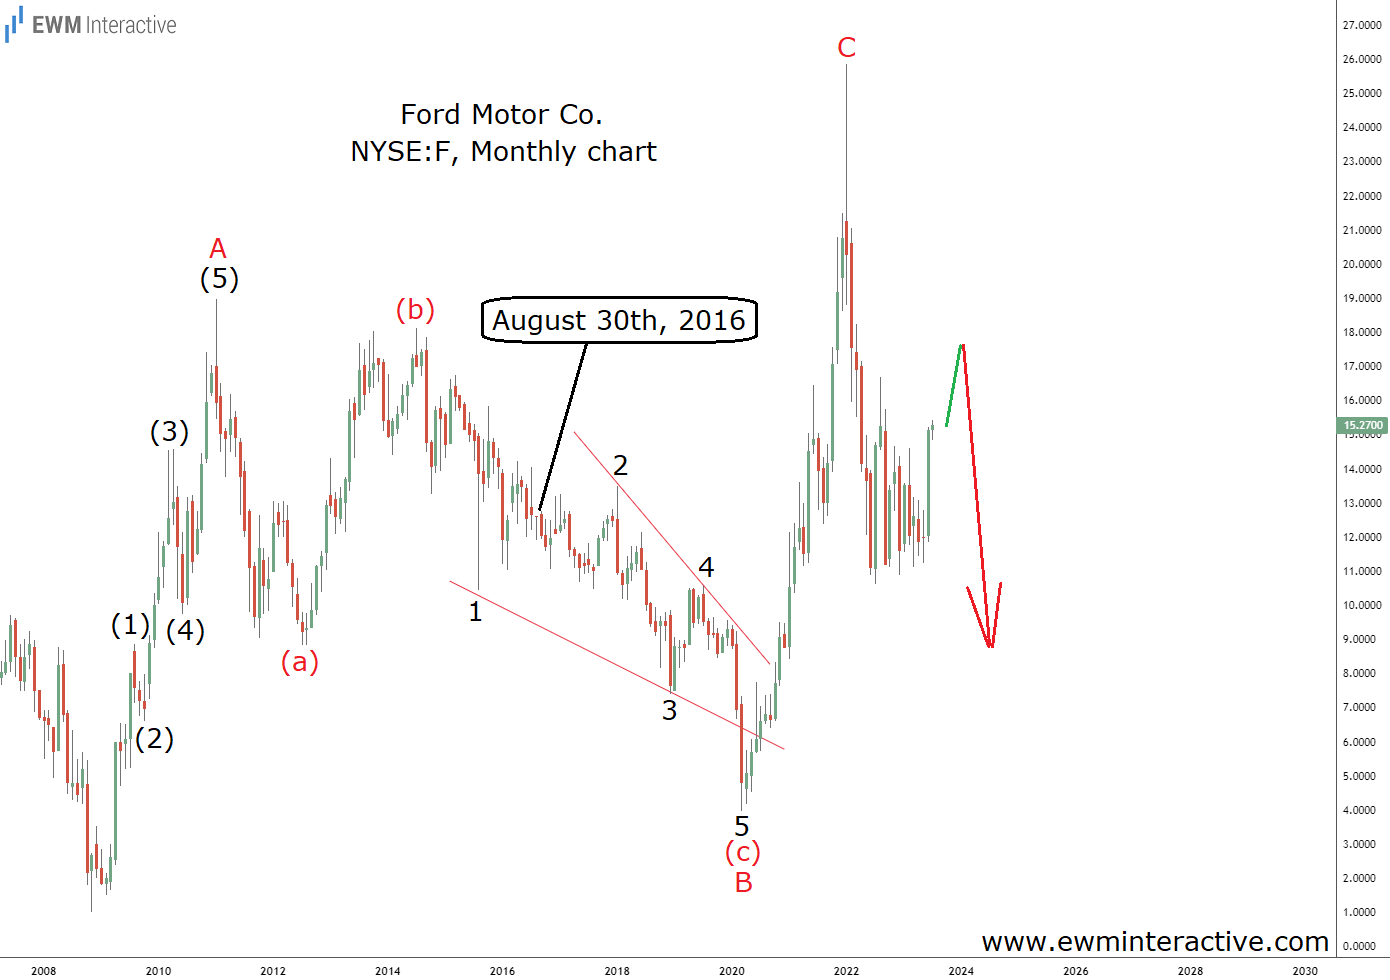 Ford-Stock Monthly Chart